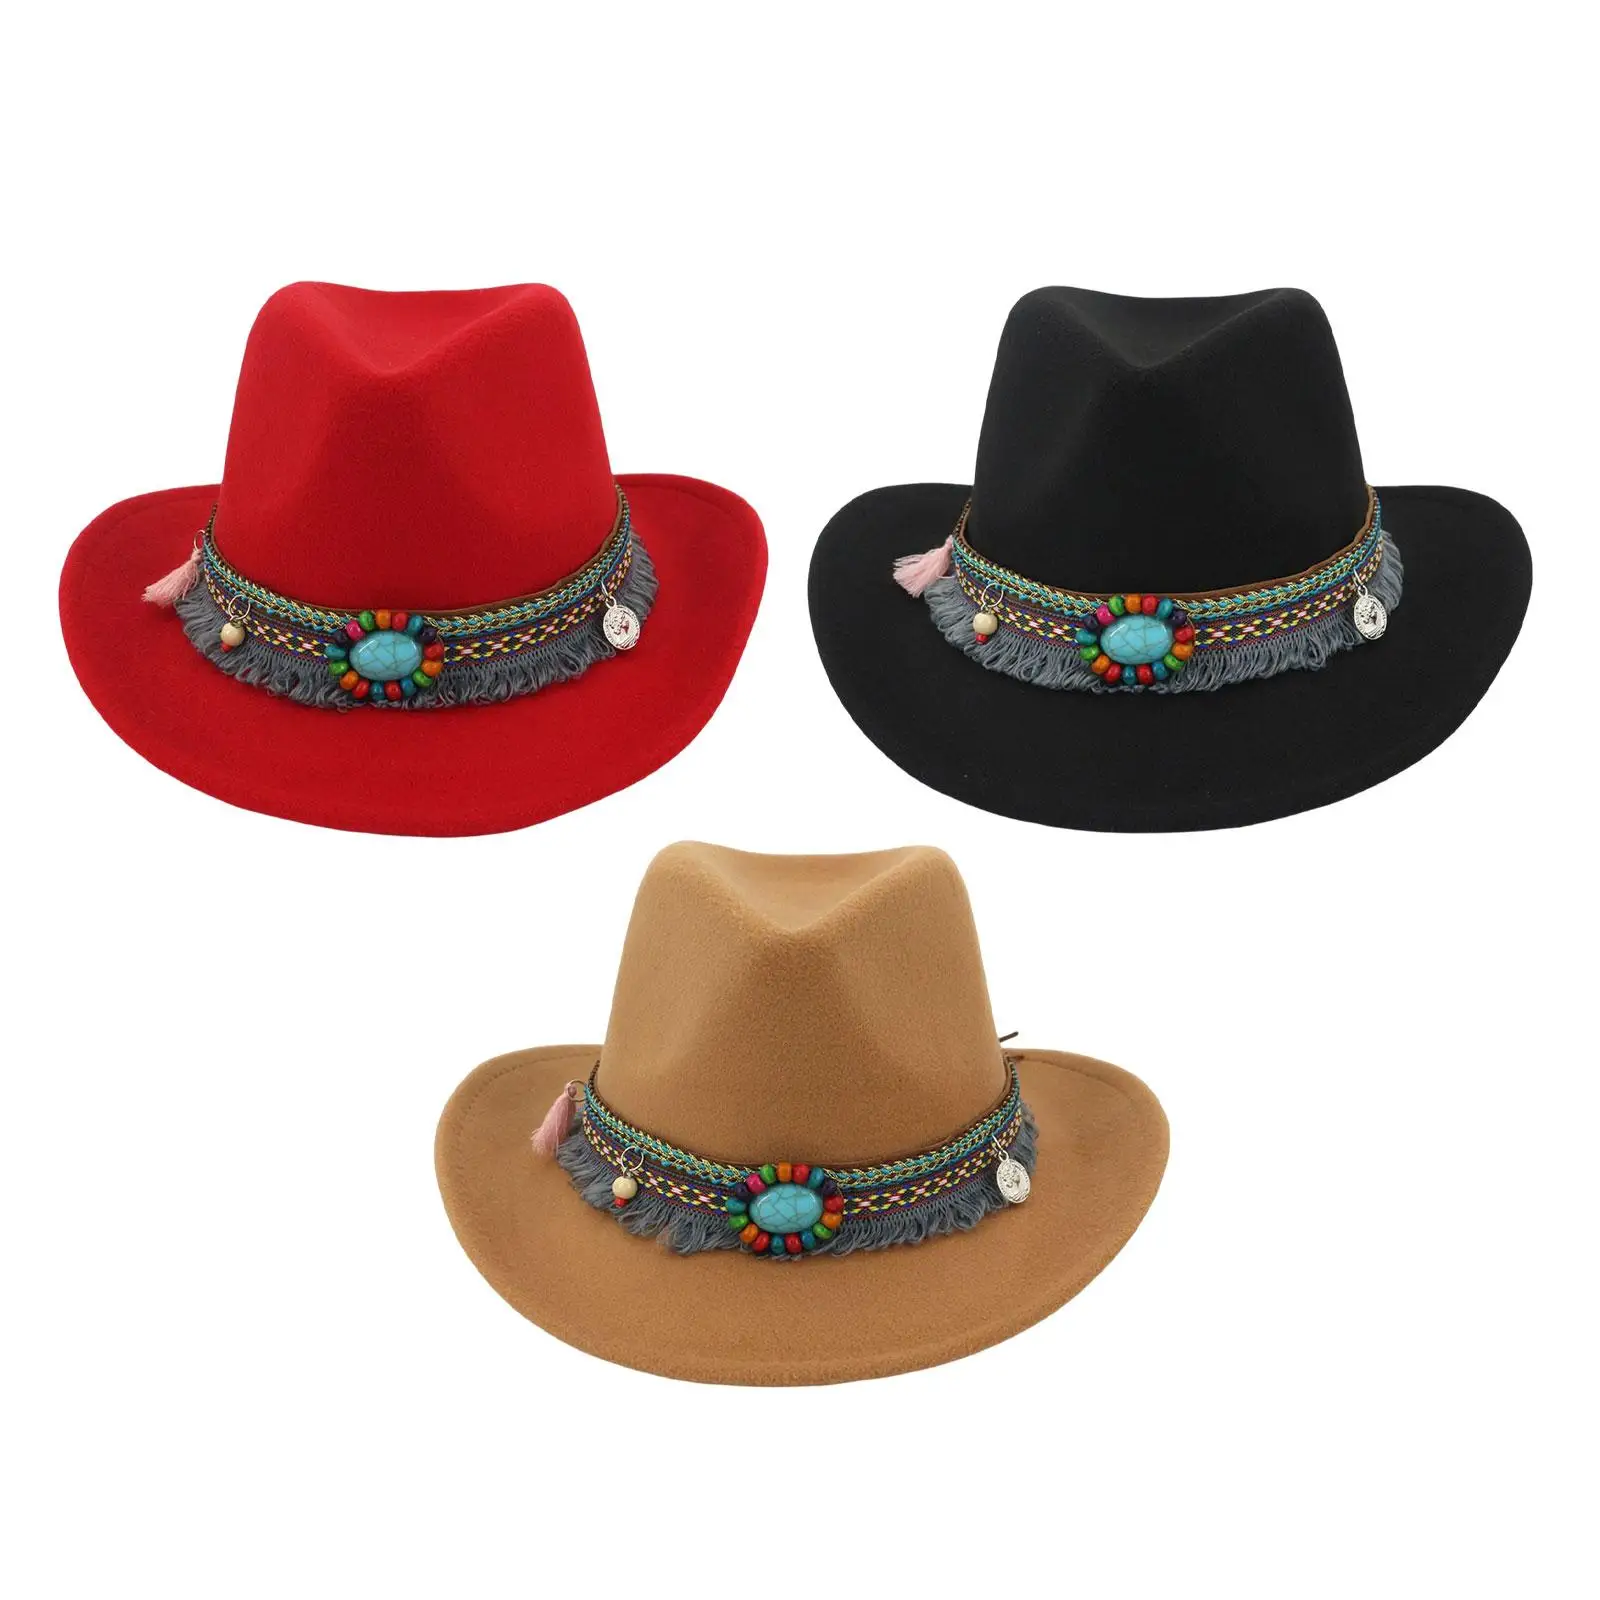 Classic Unisex Adult Western Cowboy Hat Fedoras Caps Panama Hat for Party